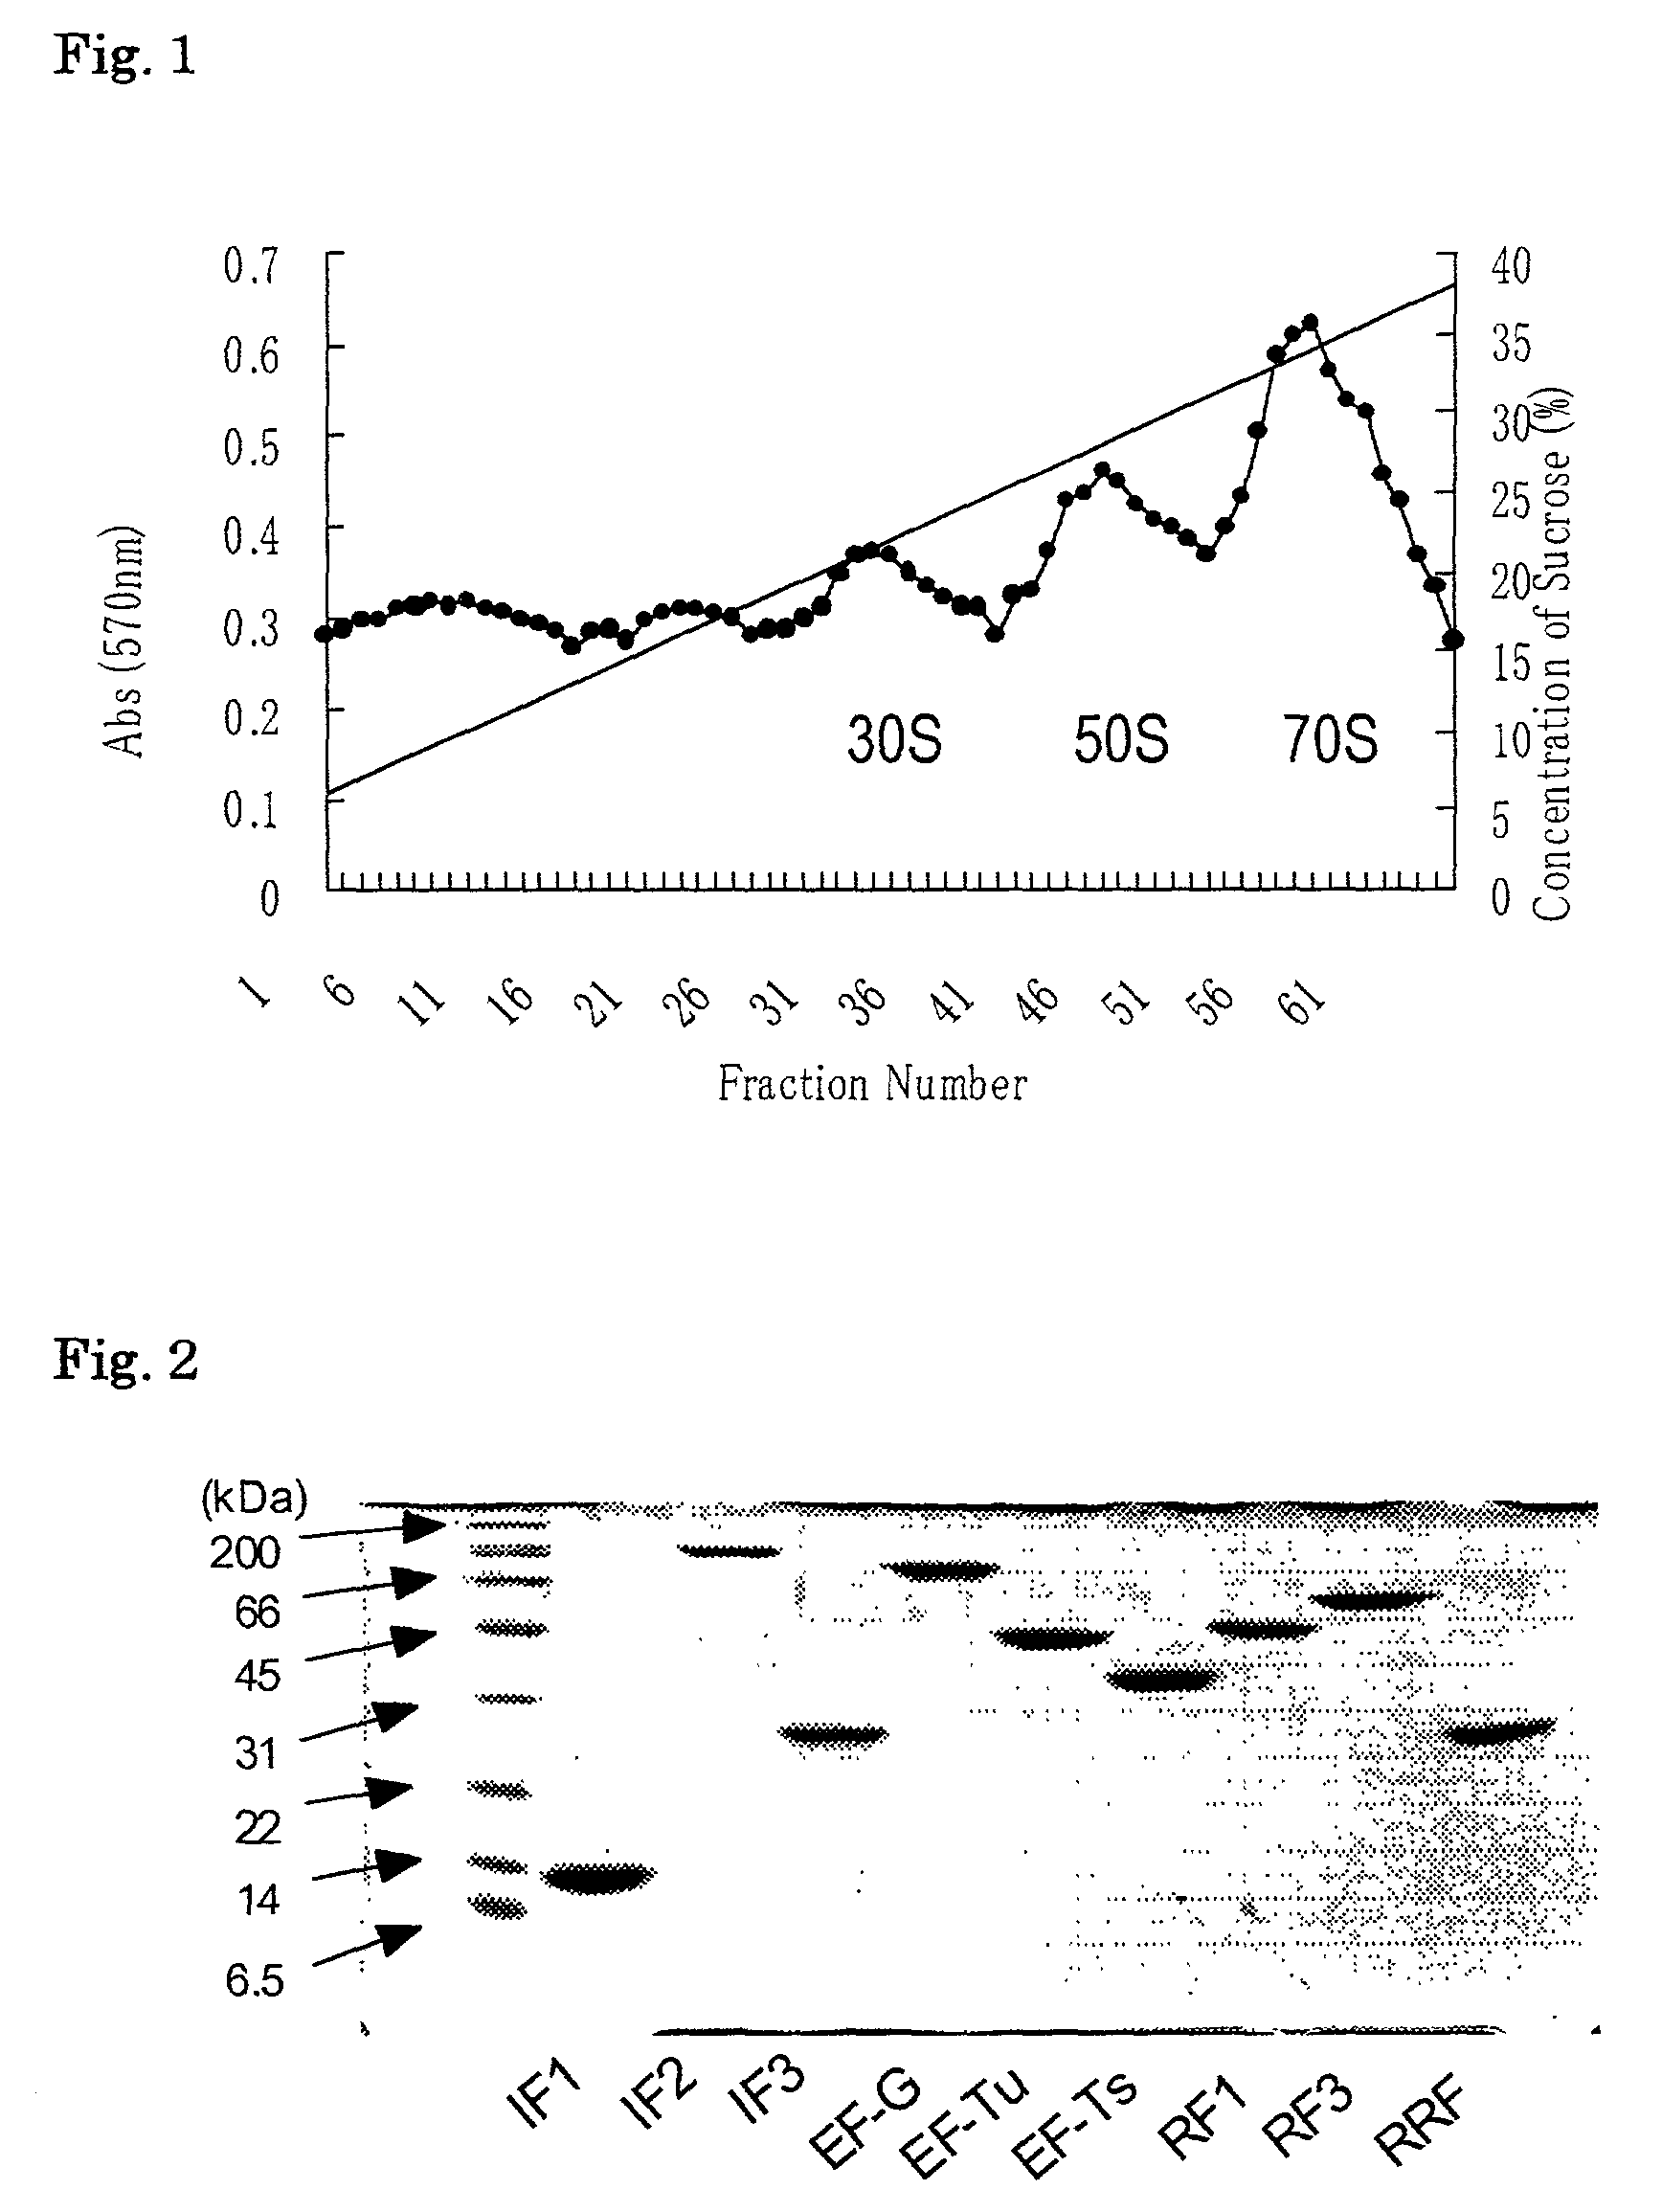 Process for producing peptides by using in vitro transcription/translation system